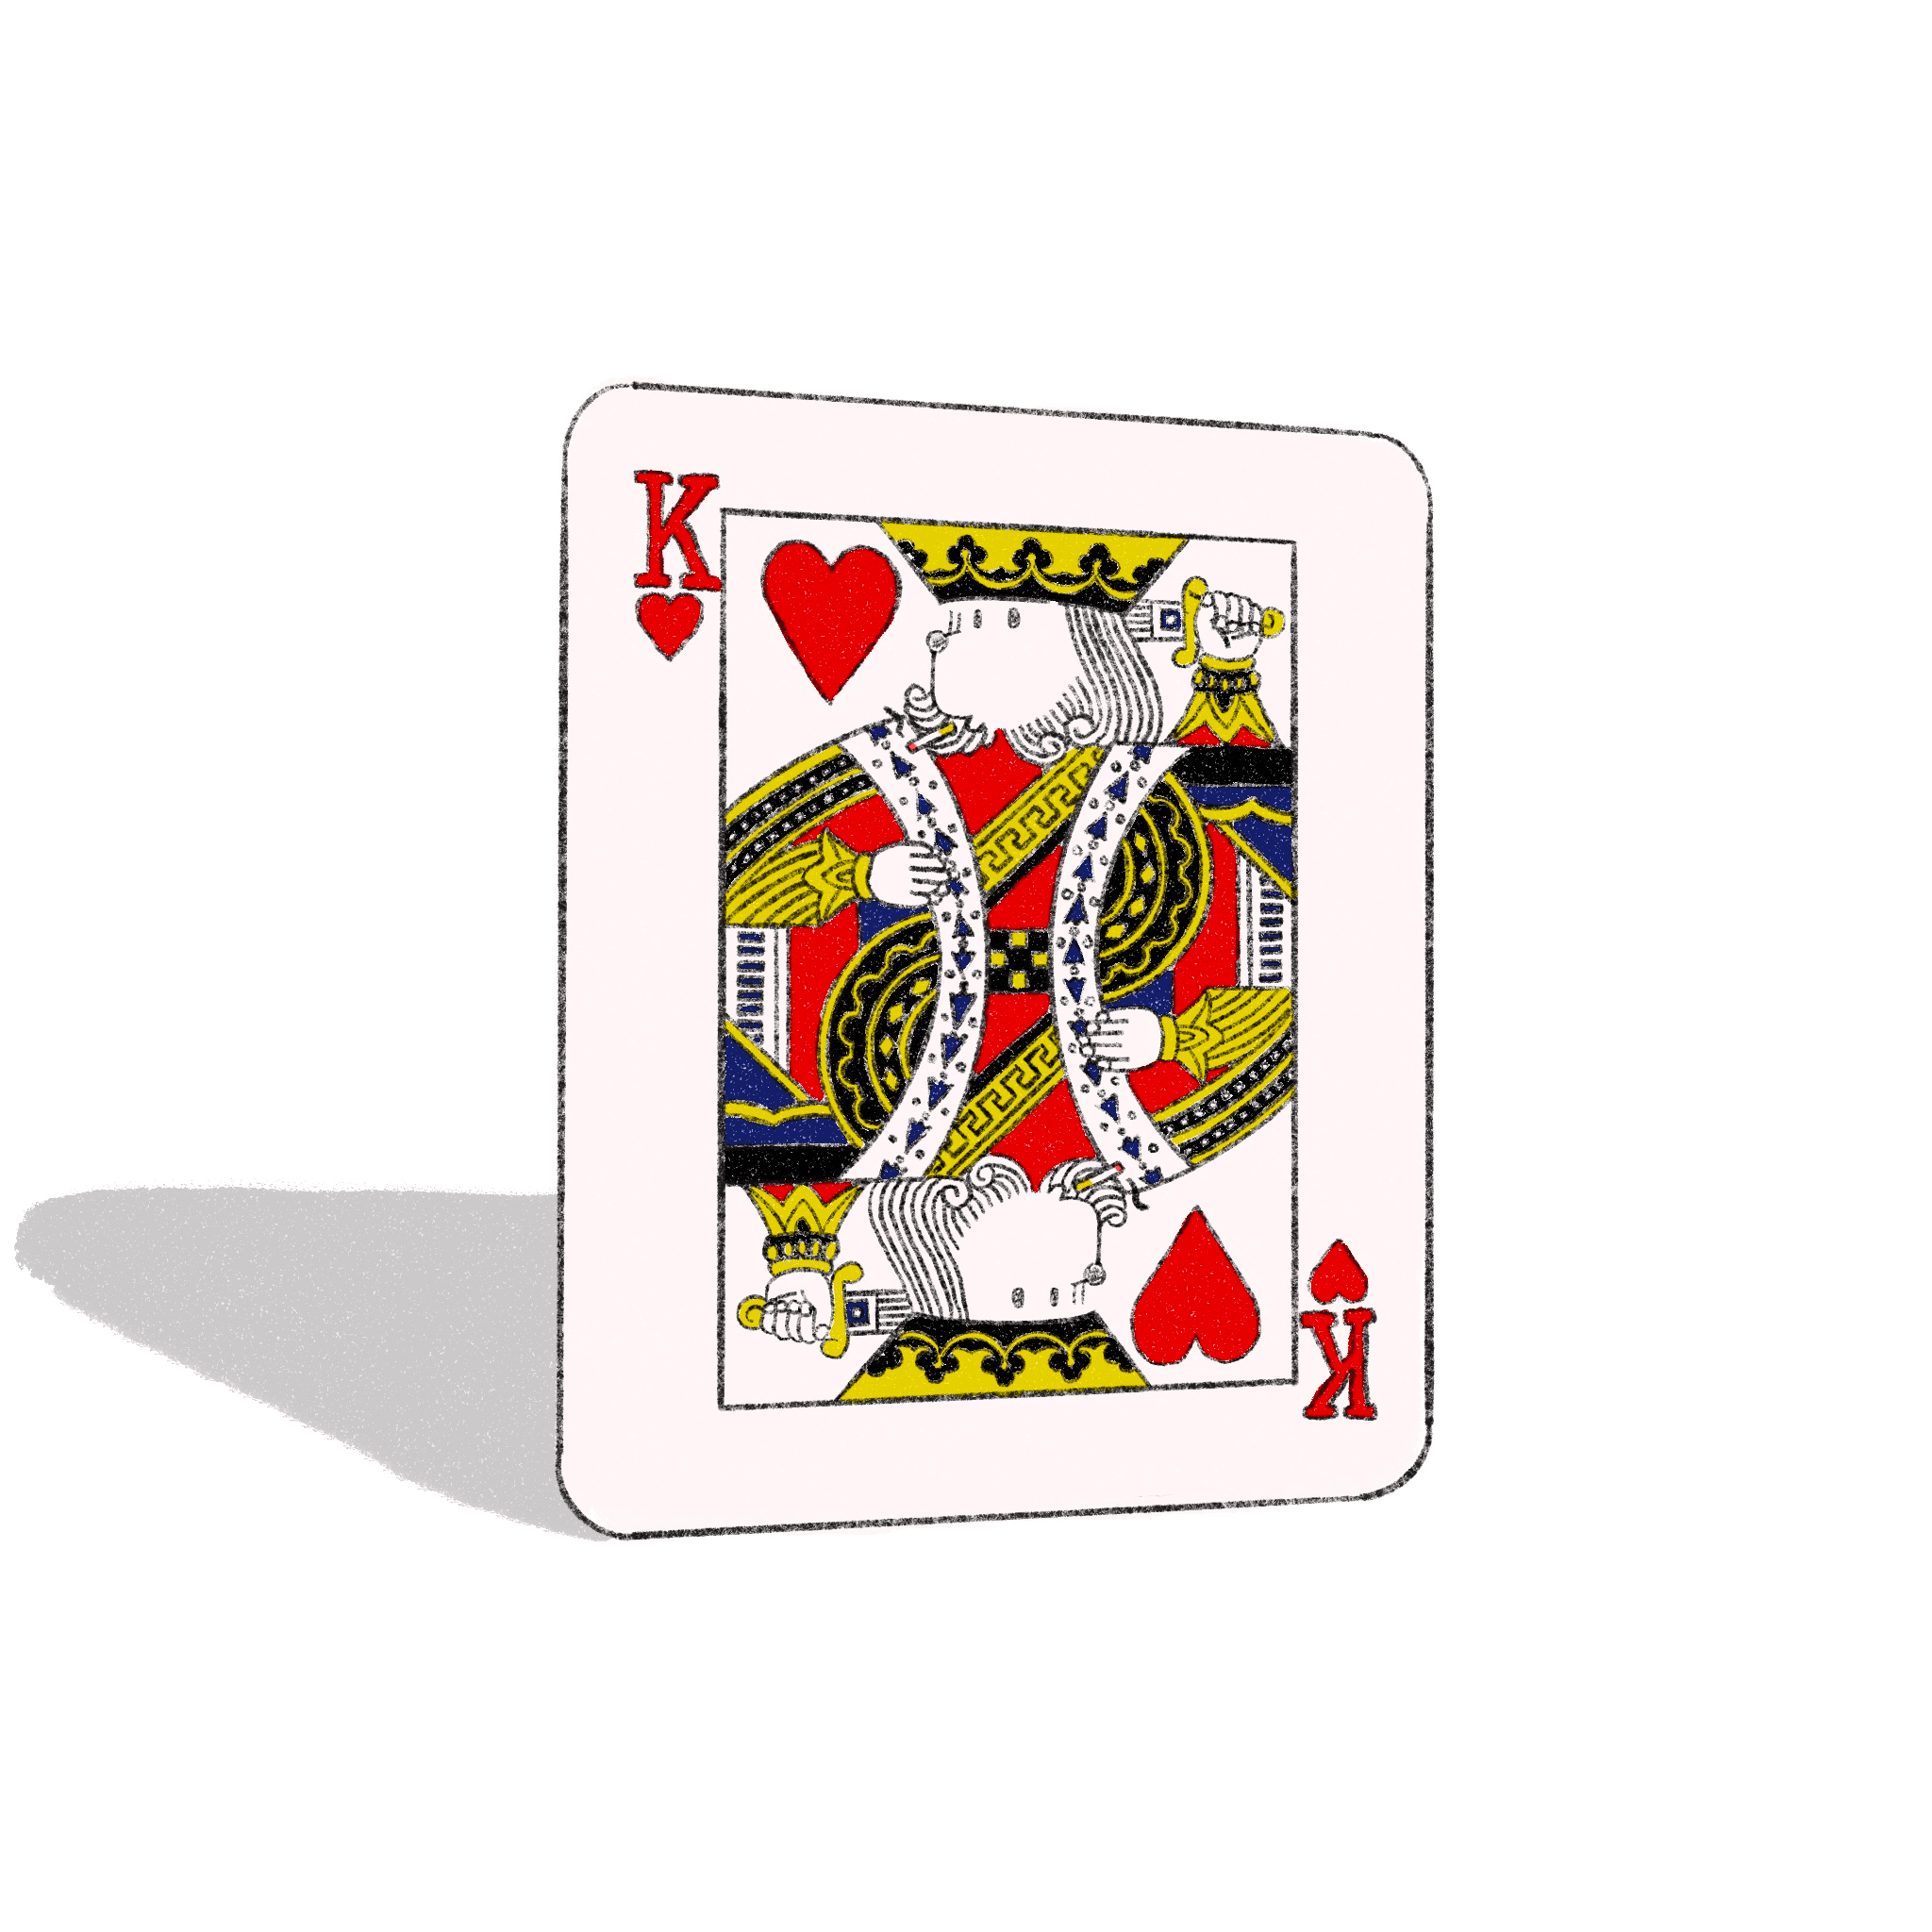 The Dog King of Hearts